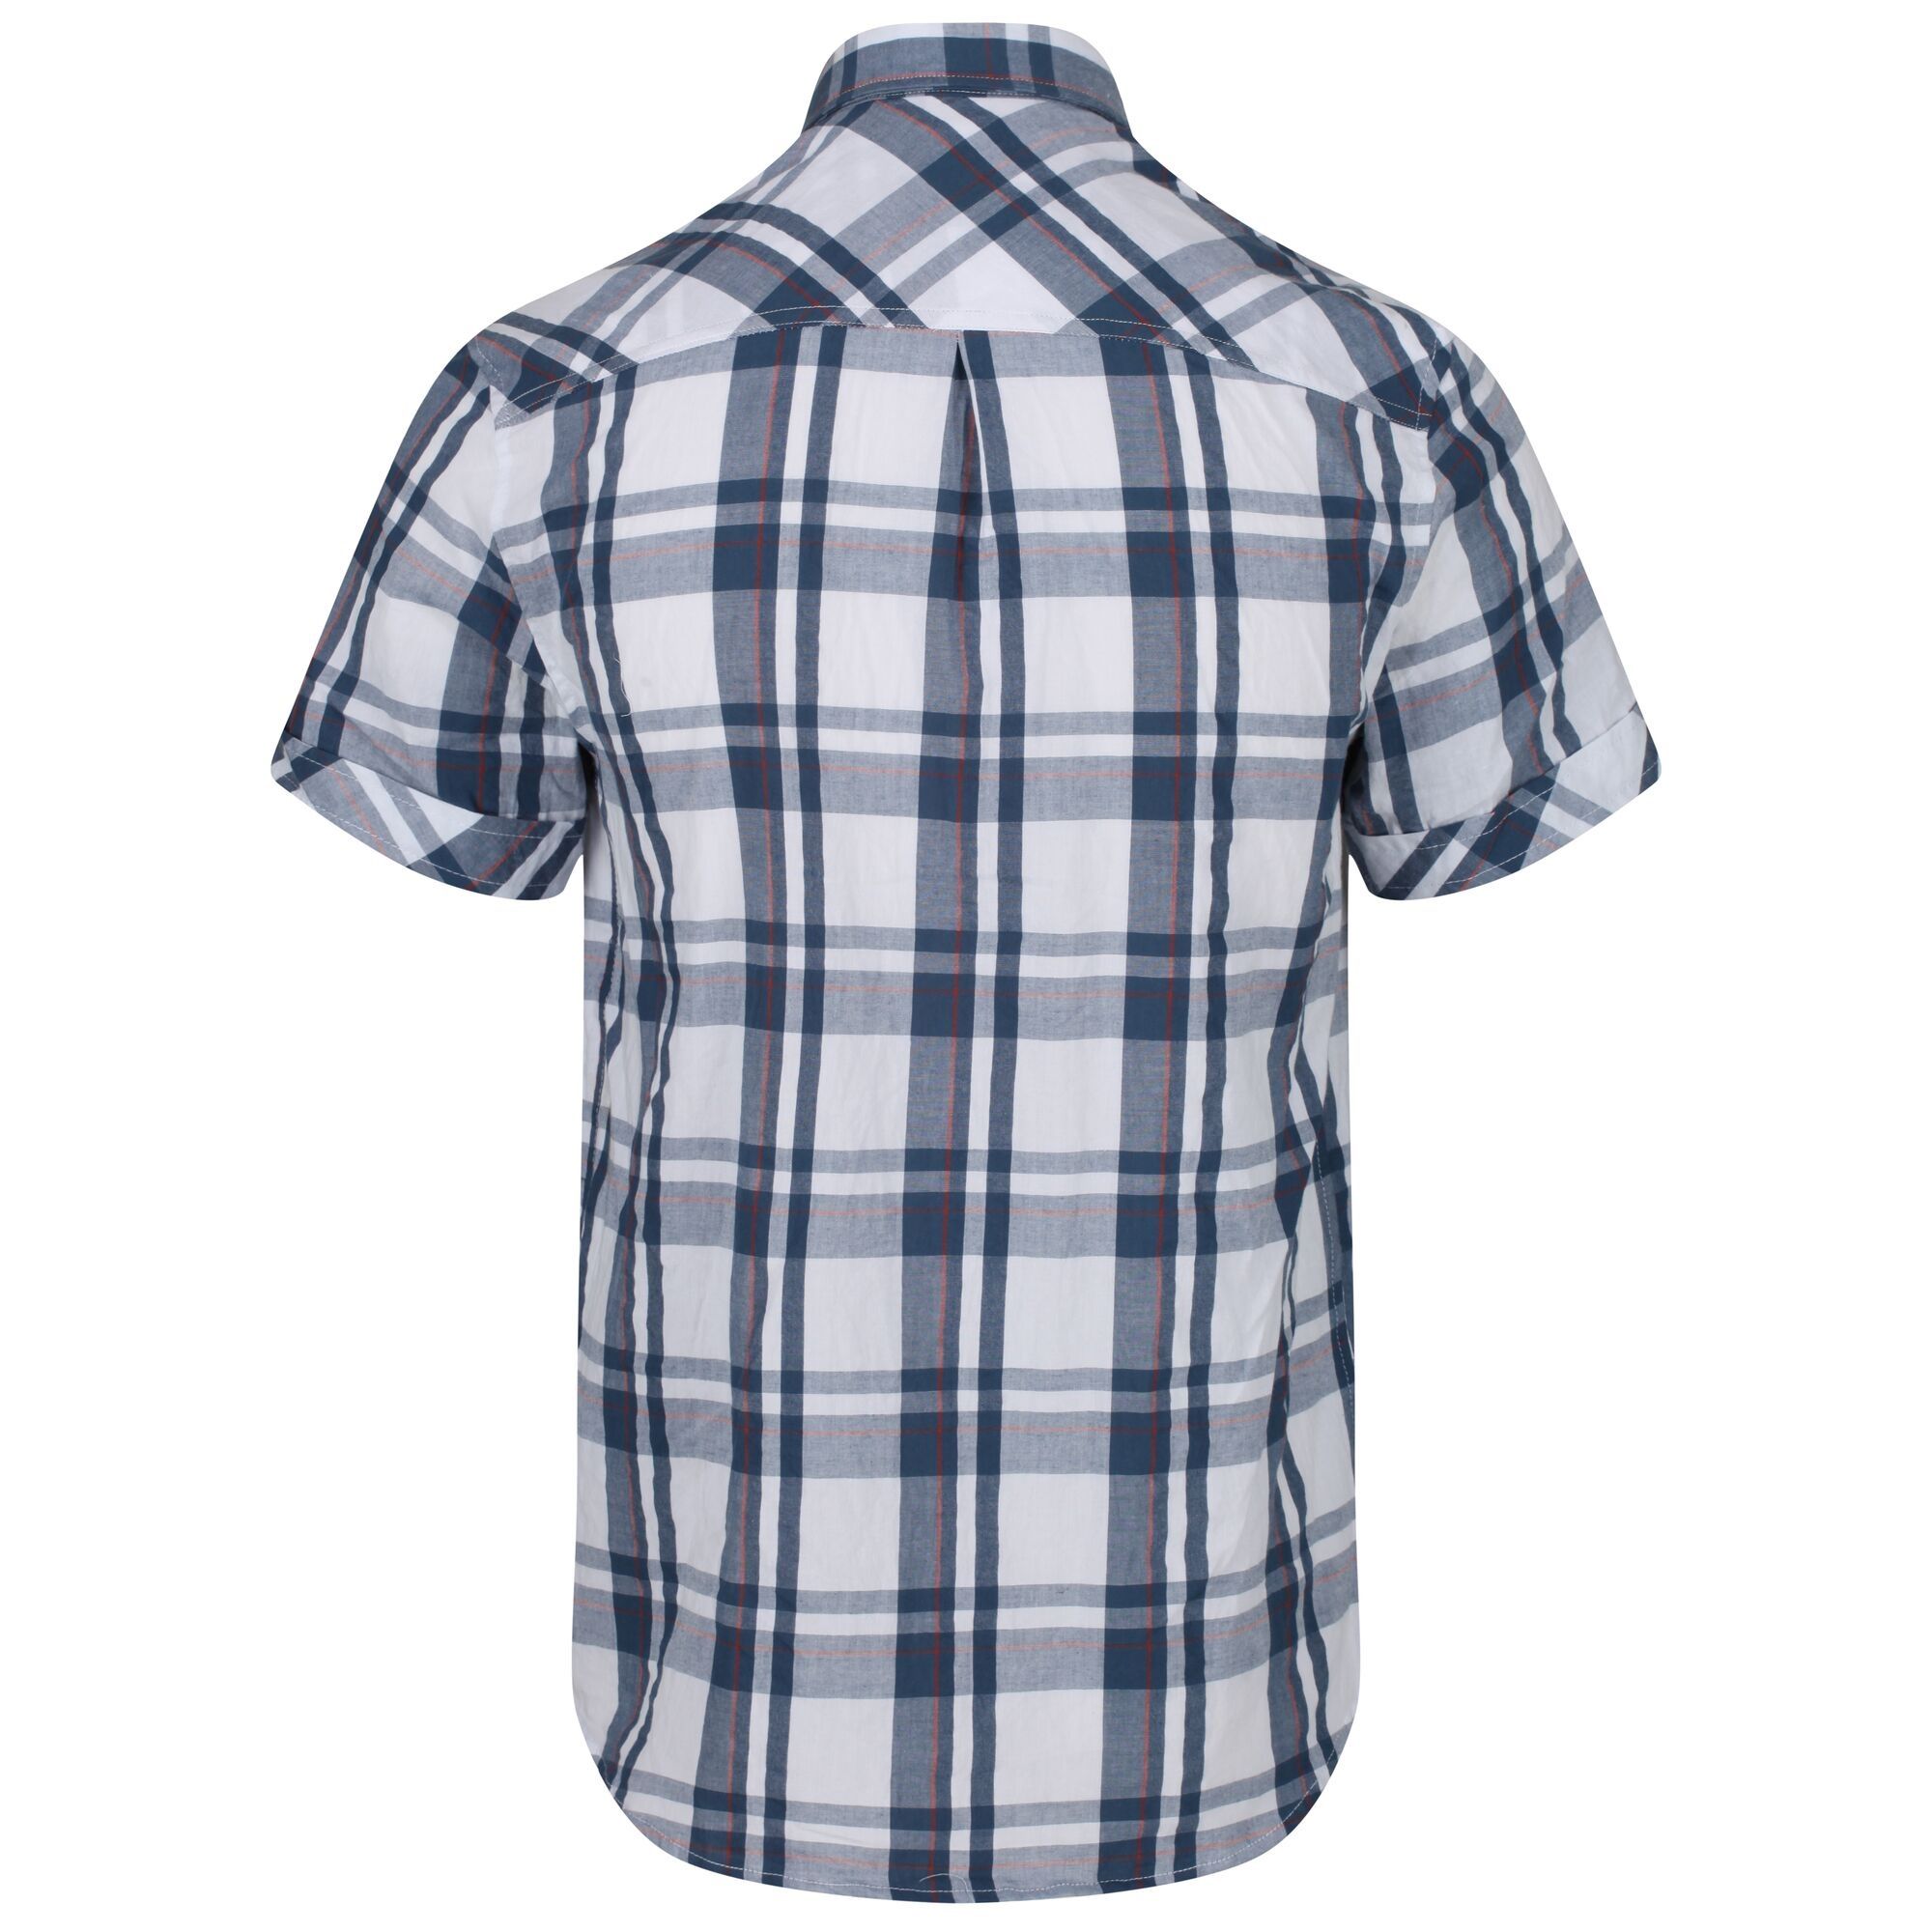 100% Cool weave cotton Check Seersucker. 1 chest pocket. Curved hem. Ideal addition to the summer fashion wardrobe.